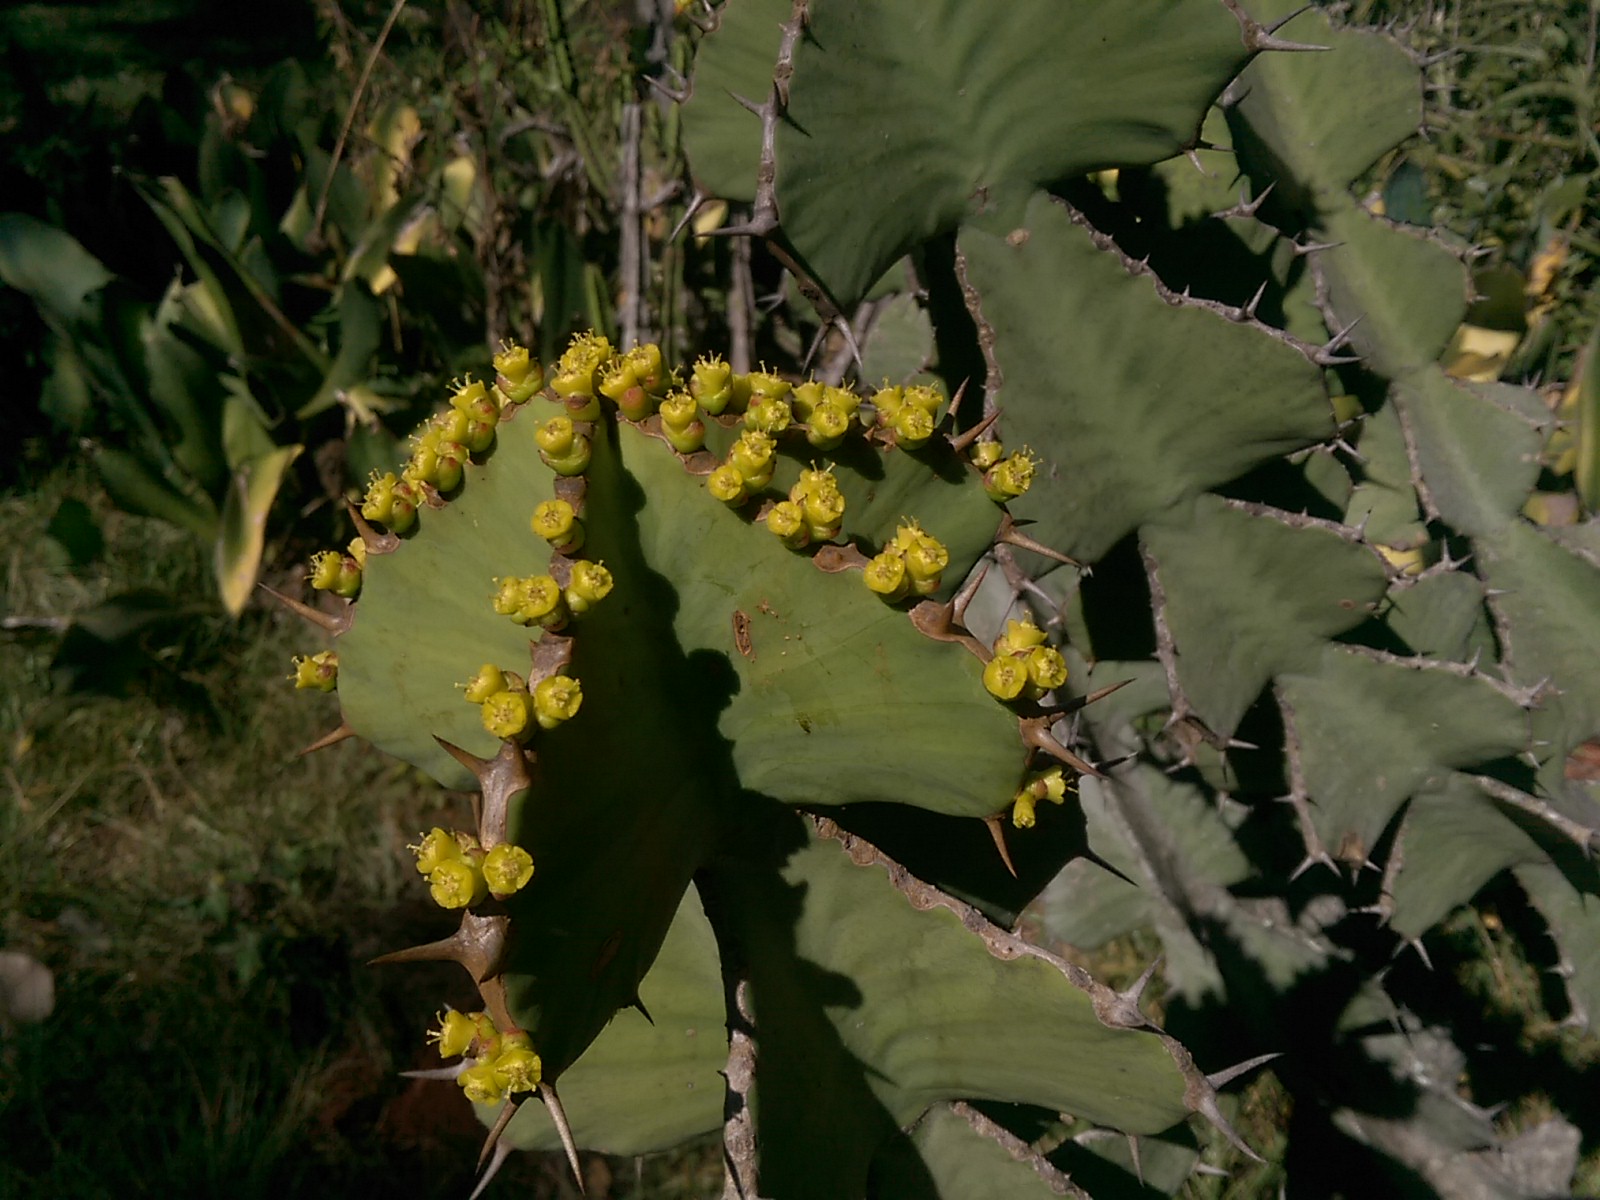 Close up of a cactus with small yellow flowers